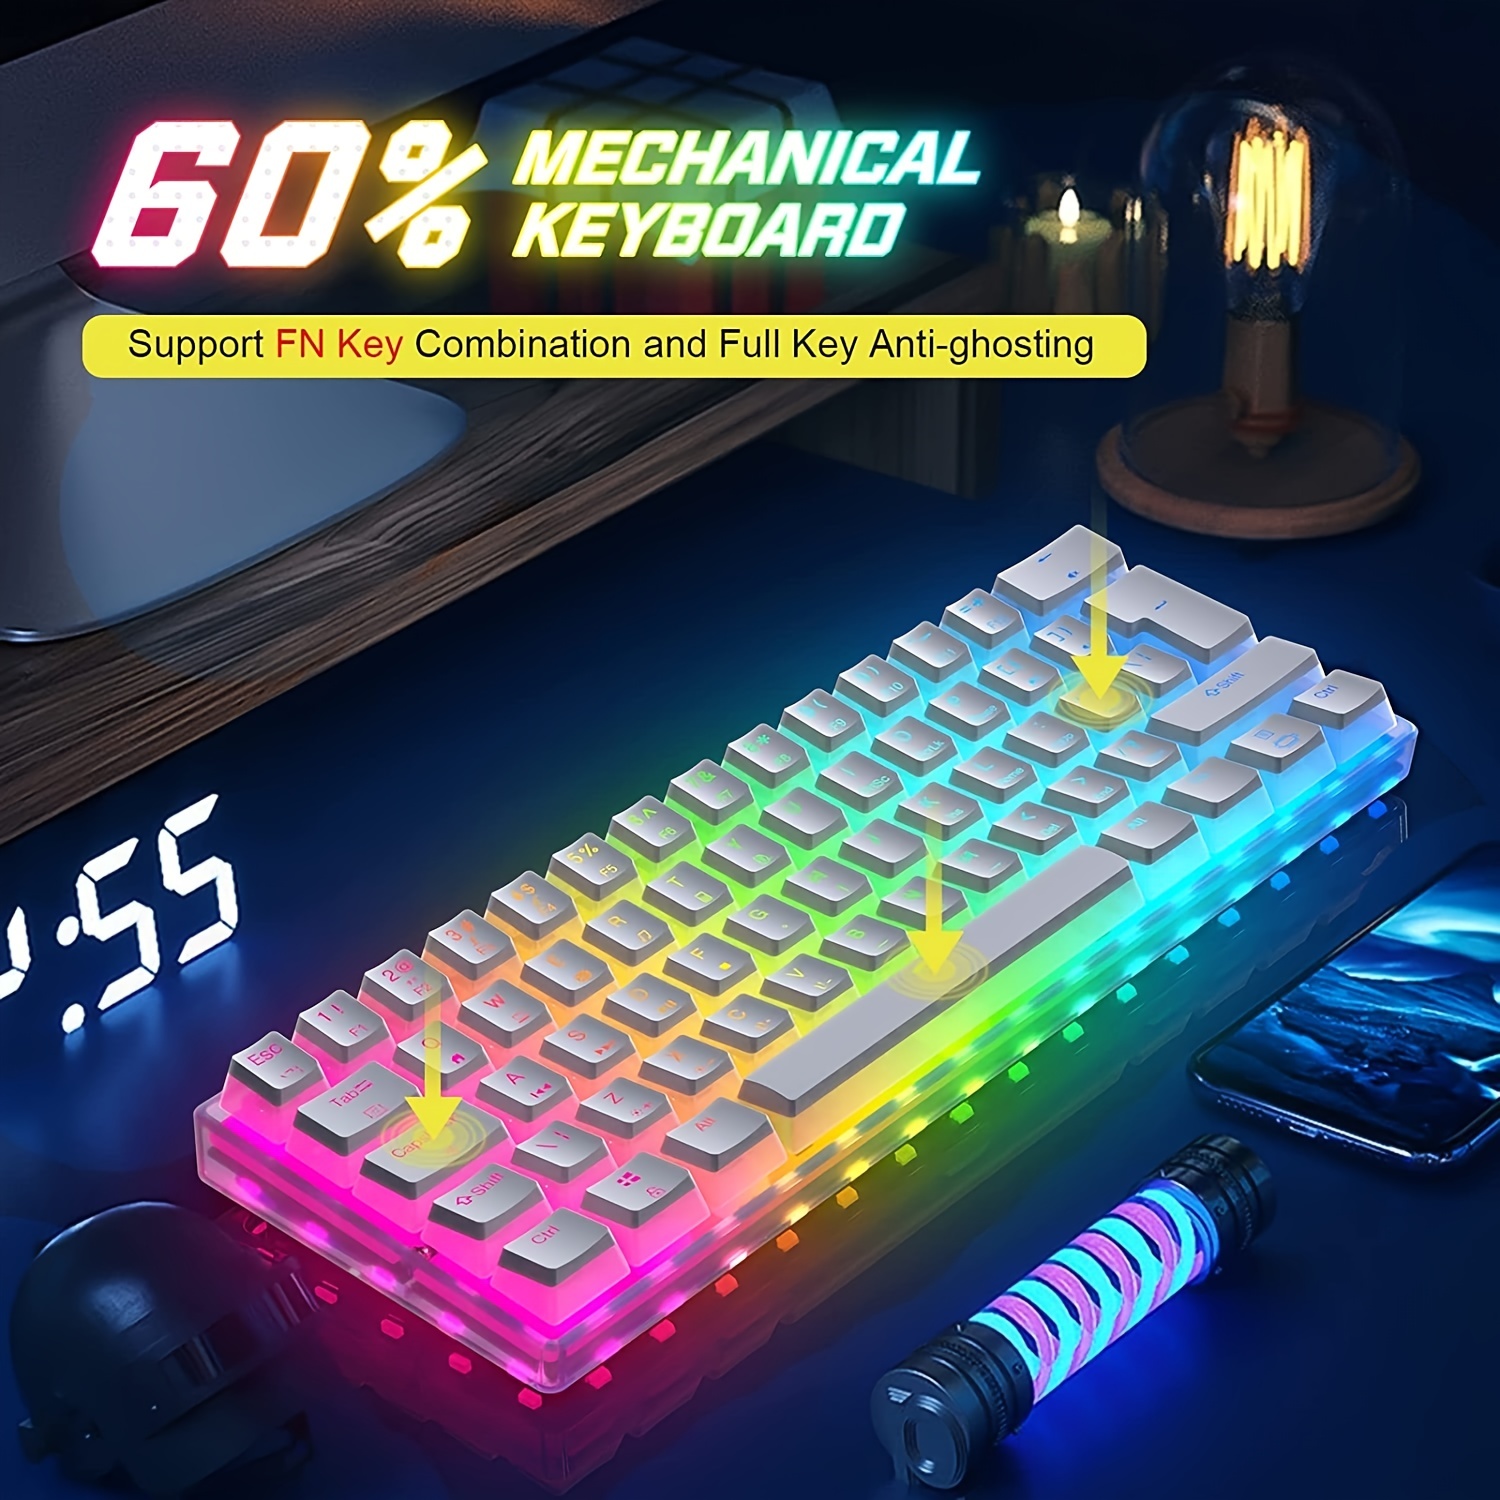 Wired Gaming Keyboard 60% True Mechanical Keyboard Mini Portable 62 Keys 19  RGB Chroma LED Backlit Full Keys Anti-Ghosting for Gamers and Typists